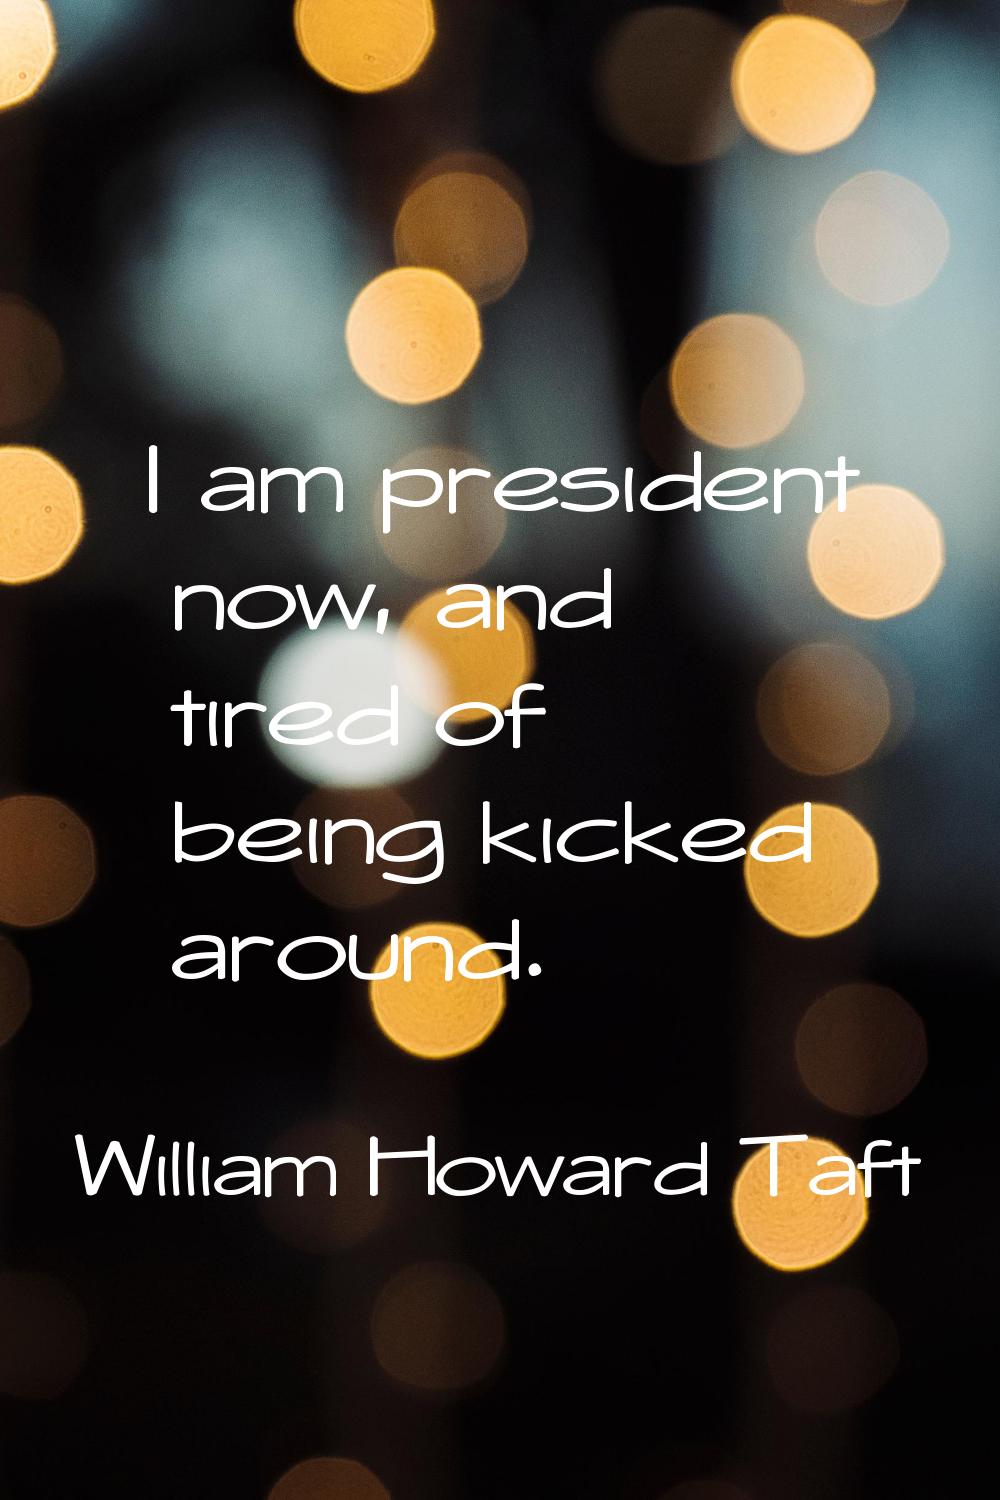 I am president now, and tired of being kicked around.